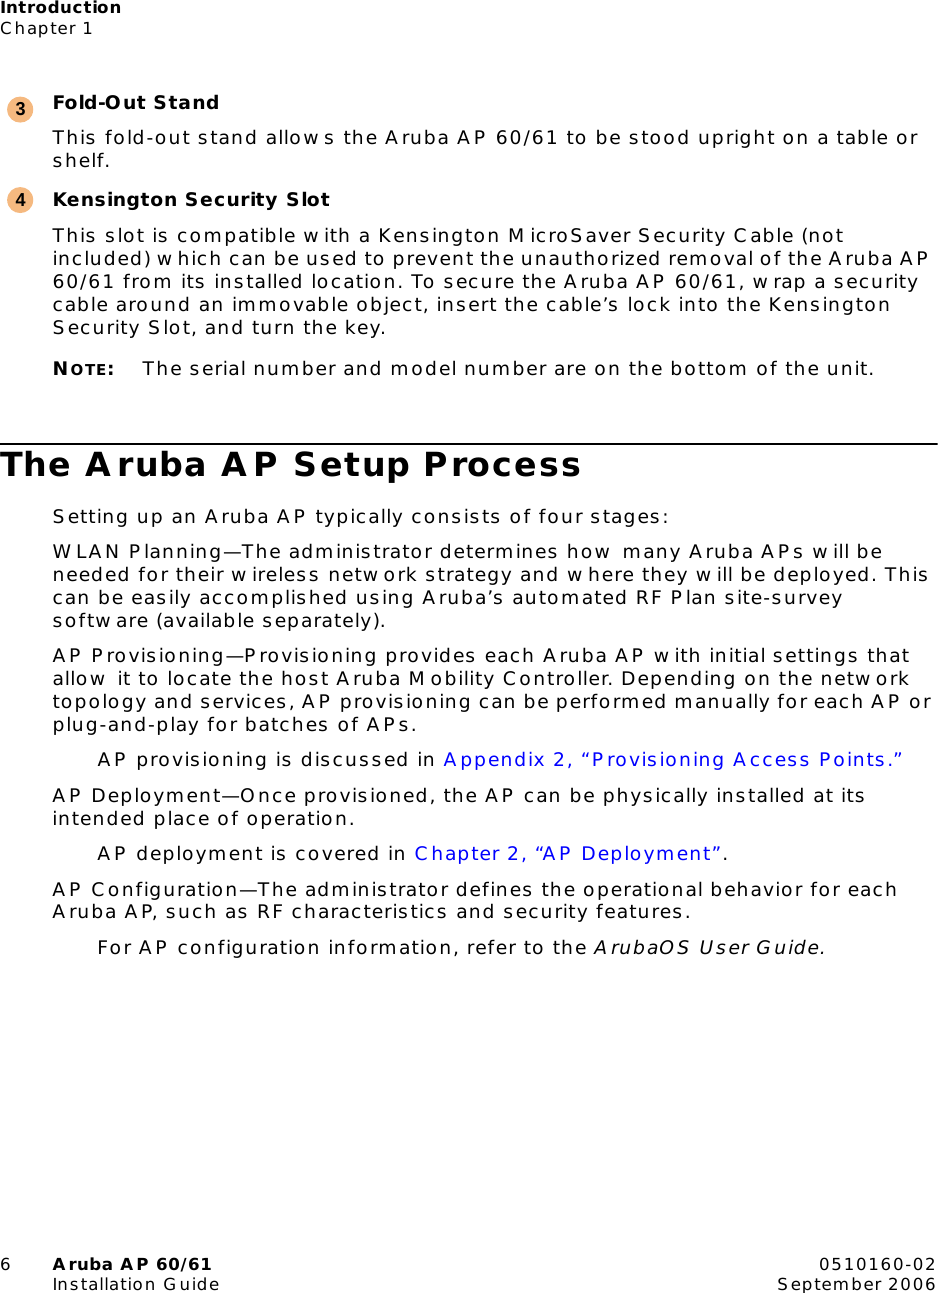 IntroductionChapter 16Aruba AP 60/61 0510160-02Installation Guide September 2006Fold-Out StandThis fold-out stand allows the Aruba AP 60/61 to be stood upright on a table or shelf.Kensington Security SlotThis slot is compatible with a Kensington MicroSaver Security Cable (not included) which can be used to prevent the unauthorized removal of the Aruba AP 60/61 from its installed location. To secure the Aruba AP 60/61, wrap a security cable around an immovable object, insert the cable’s lock into the Kensington Security Slot, and turn the key.NOTE:The serial number and model number are on the bottom of the unit.The Aruba AP Setup ProcessSetting up an Aruba AP typically consists of four stages:WLAN Planning—The administrator determines how many Aruba APs will be needed for their wireless network strategy and where they will be deployed. This can be easily accomplished using Aruba’s automated RF Plan site-survey software (available separately).AP Provisioning—Provisioning provides each Aruba AP with initial settings that allow it to locate the host Aruba Mobility Controller. Depending on the network topology and services, AP provisioning can be performed manually for each AP or plug-and-play for batches of APs.AP provisioning is discussed in Appendix 2, “Provisioning Access Points.”AP Deployment—Once provisioned, the AP can be physically installed at its intended place of operation.AP deployment is covered in Chapter 2, “AP Deployment”.AP Configuration—The administrator defines the operational behavior for each Aruba AP, such as RF characteristics and security features.For AP configuration information, refer to the ArubaOS User Guide.34